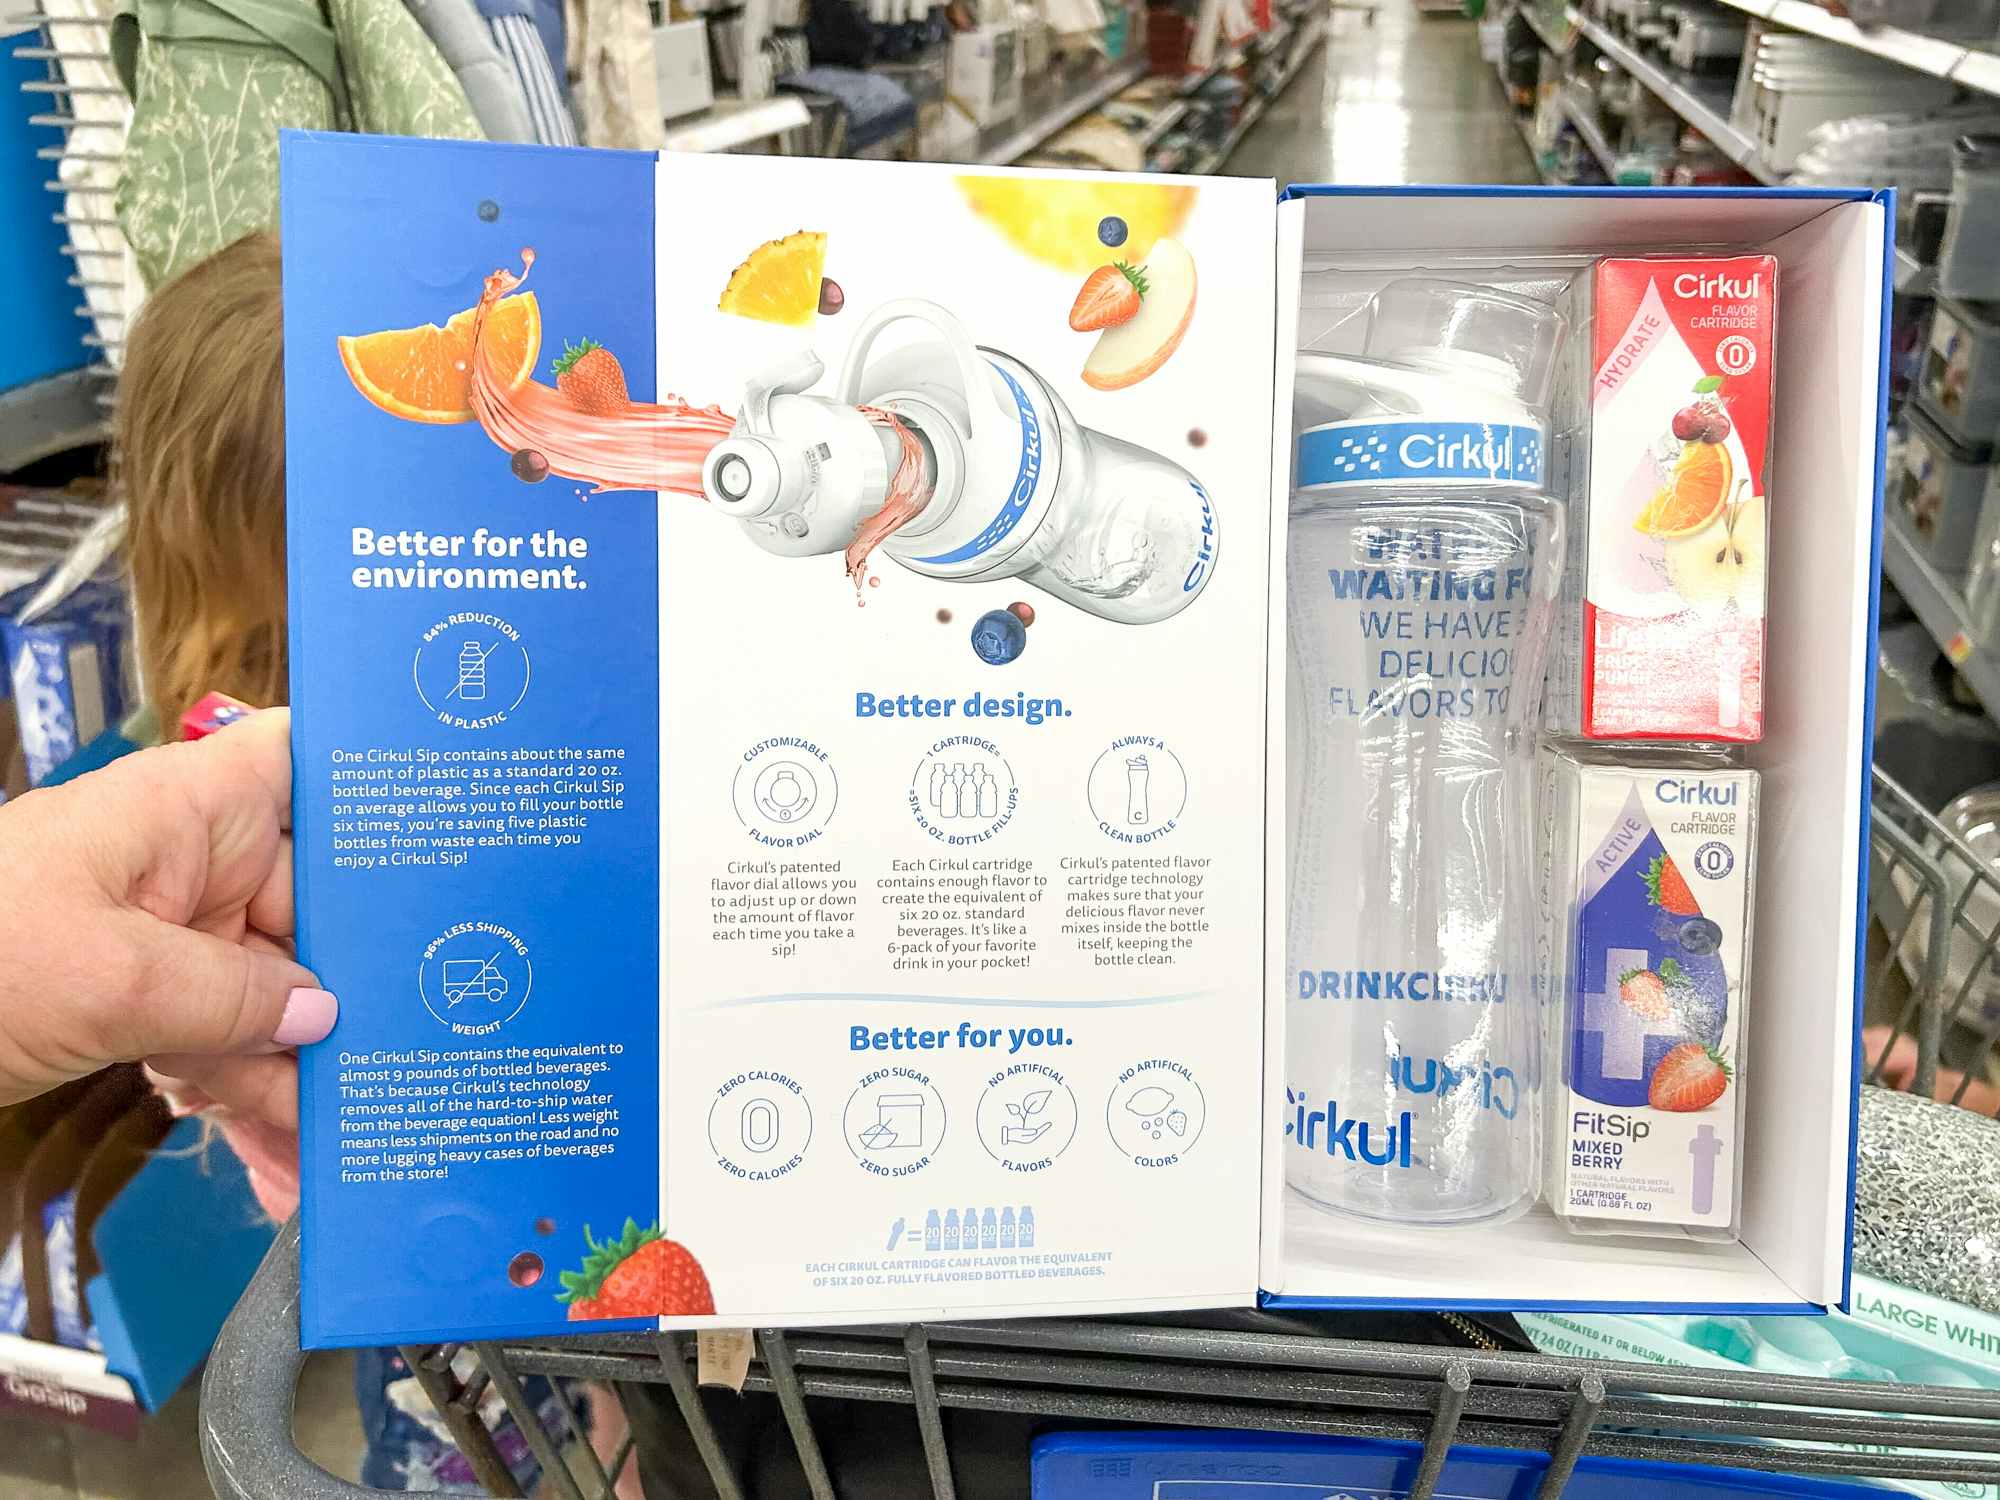 Someone holding up a Cirkul water bottle box in a Walmart store, showing the contents of the box